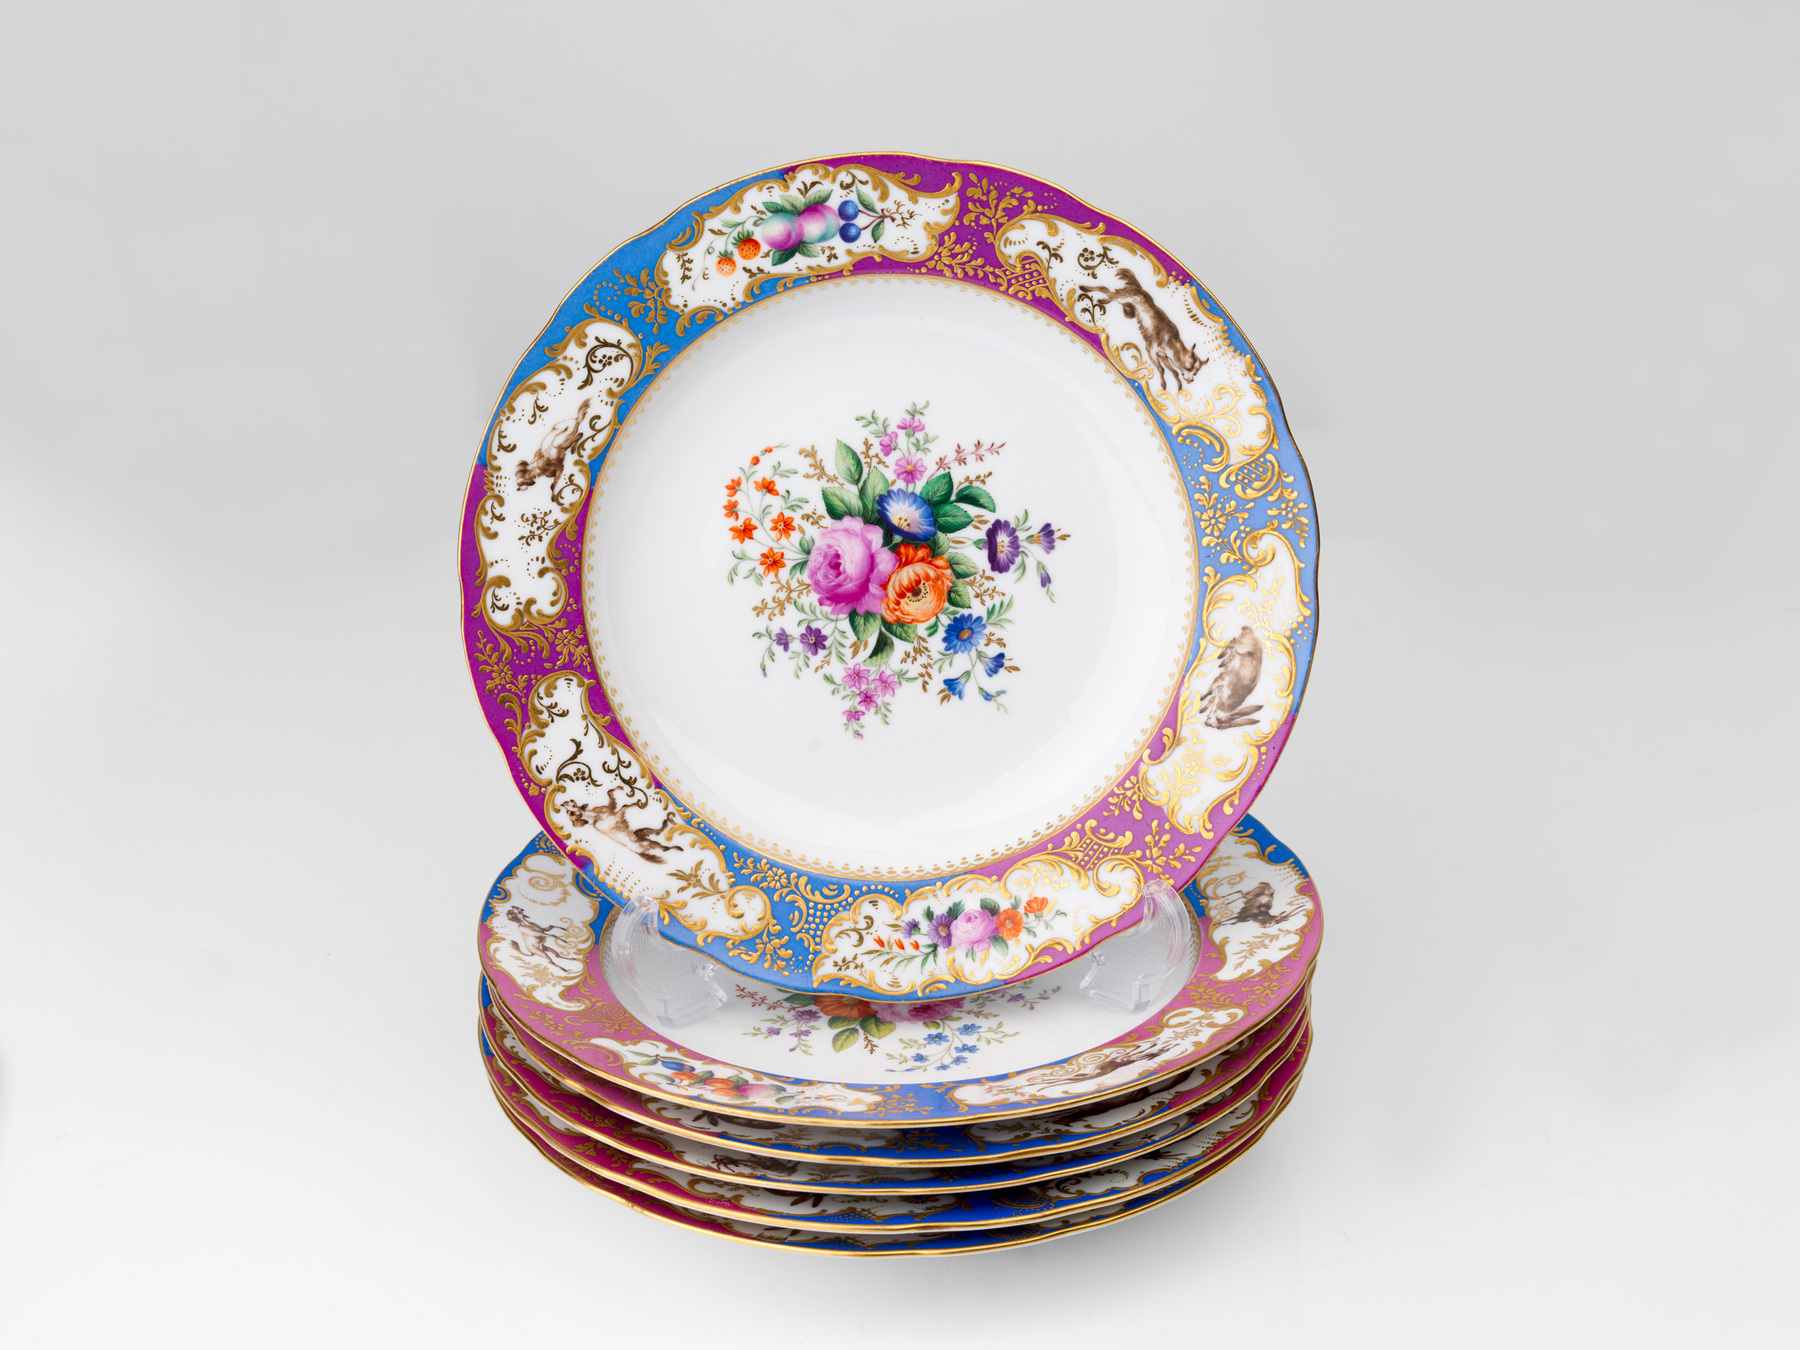 A Set of Six Dinner and Six Soup Plates from the Grand Duke Mikhail Pavlovich Service